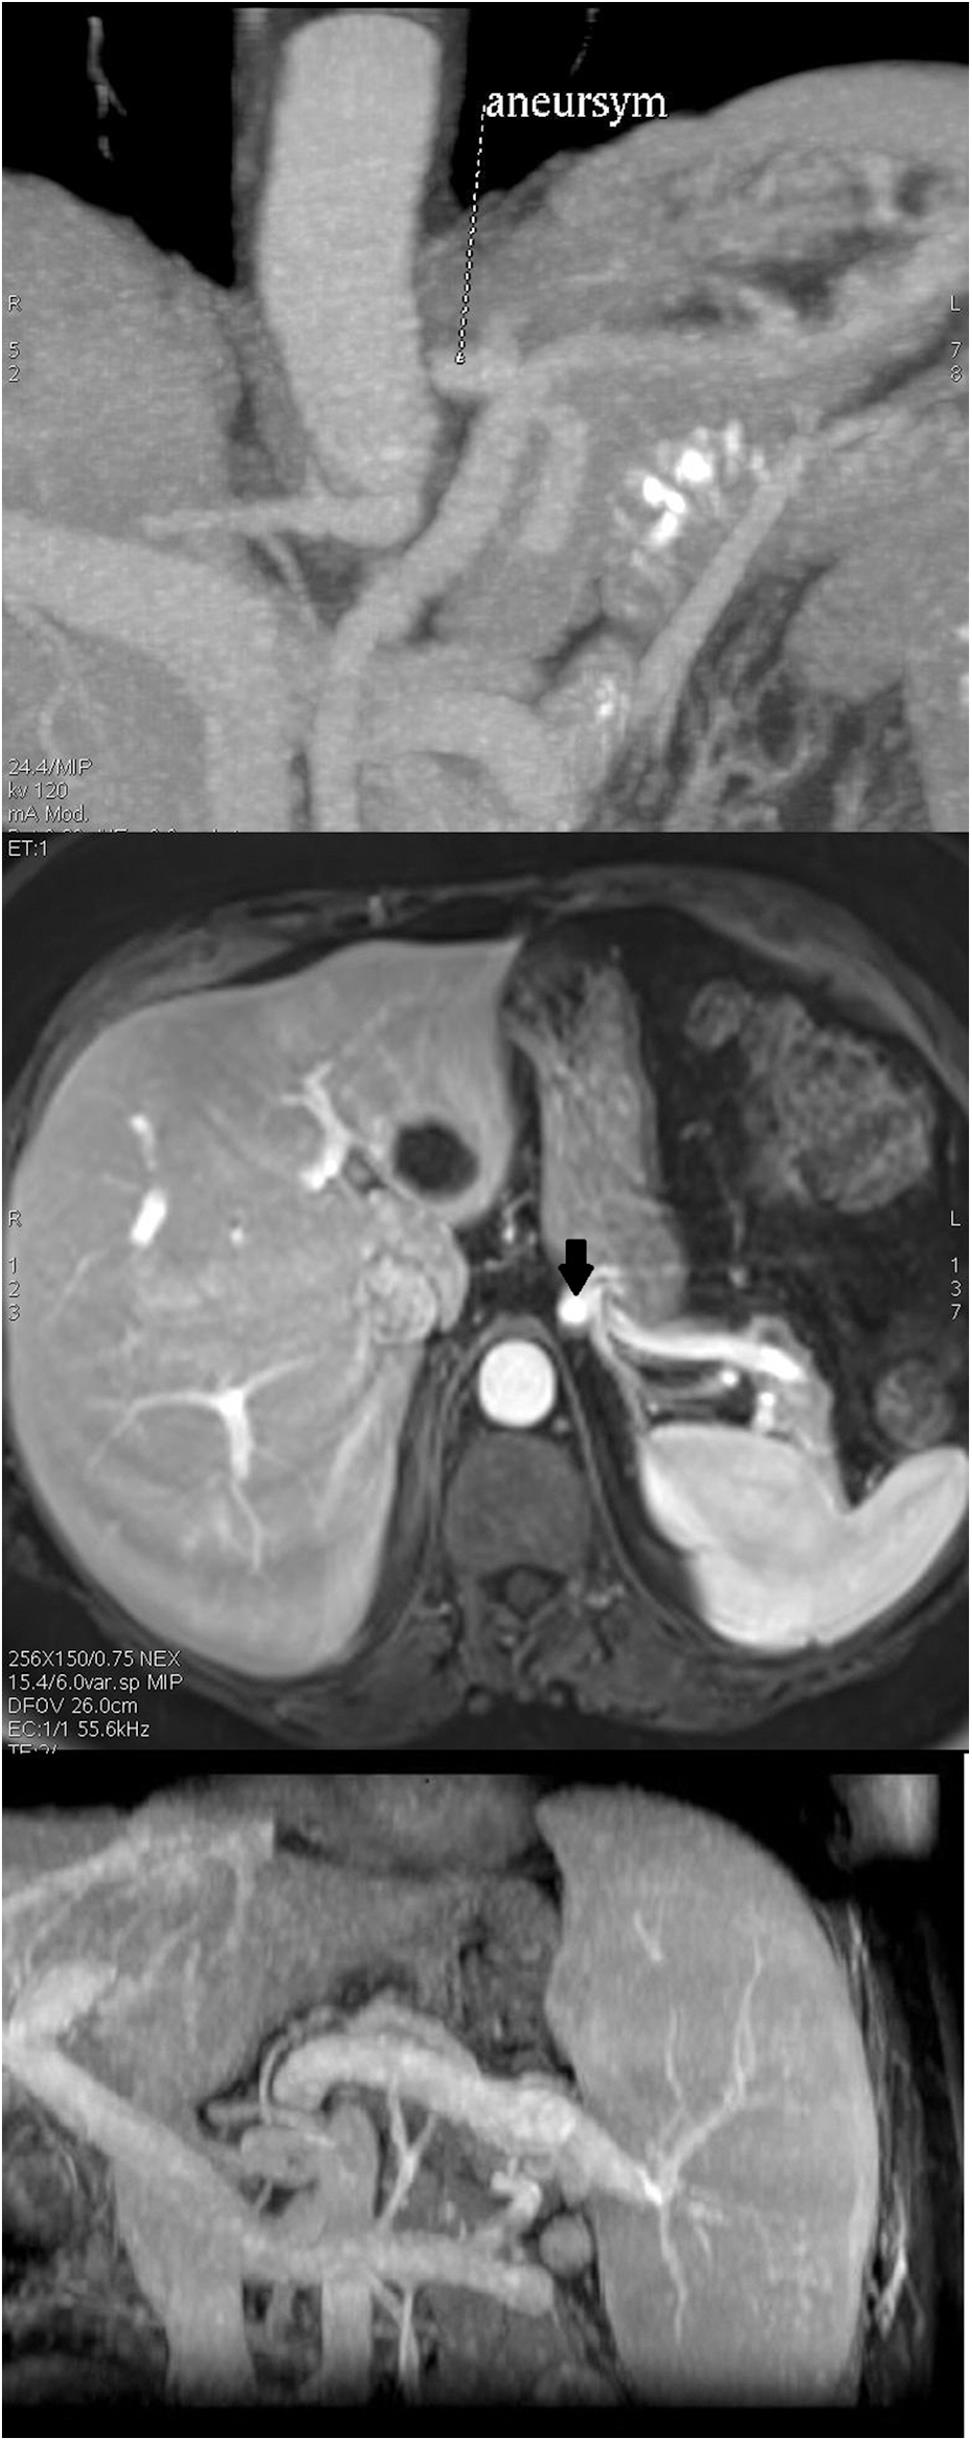 Splenic artery aneurysm as seen on a CT scan of the abdomen under maximum intensity projection (MIP) (topmost image), a splenic artery aneurysm on MRI of the abdomen with contrast (marked by the arrow) (center image), and a spontaneous splenorenal shunt as seen in a CT scan of the abdomen with contrast (bottom image).